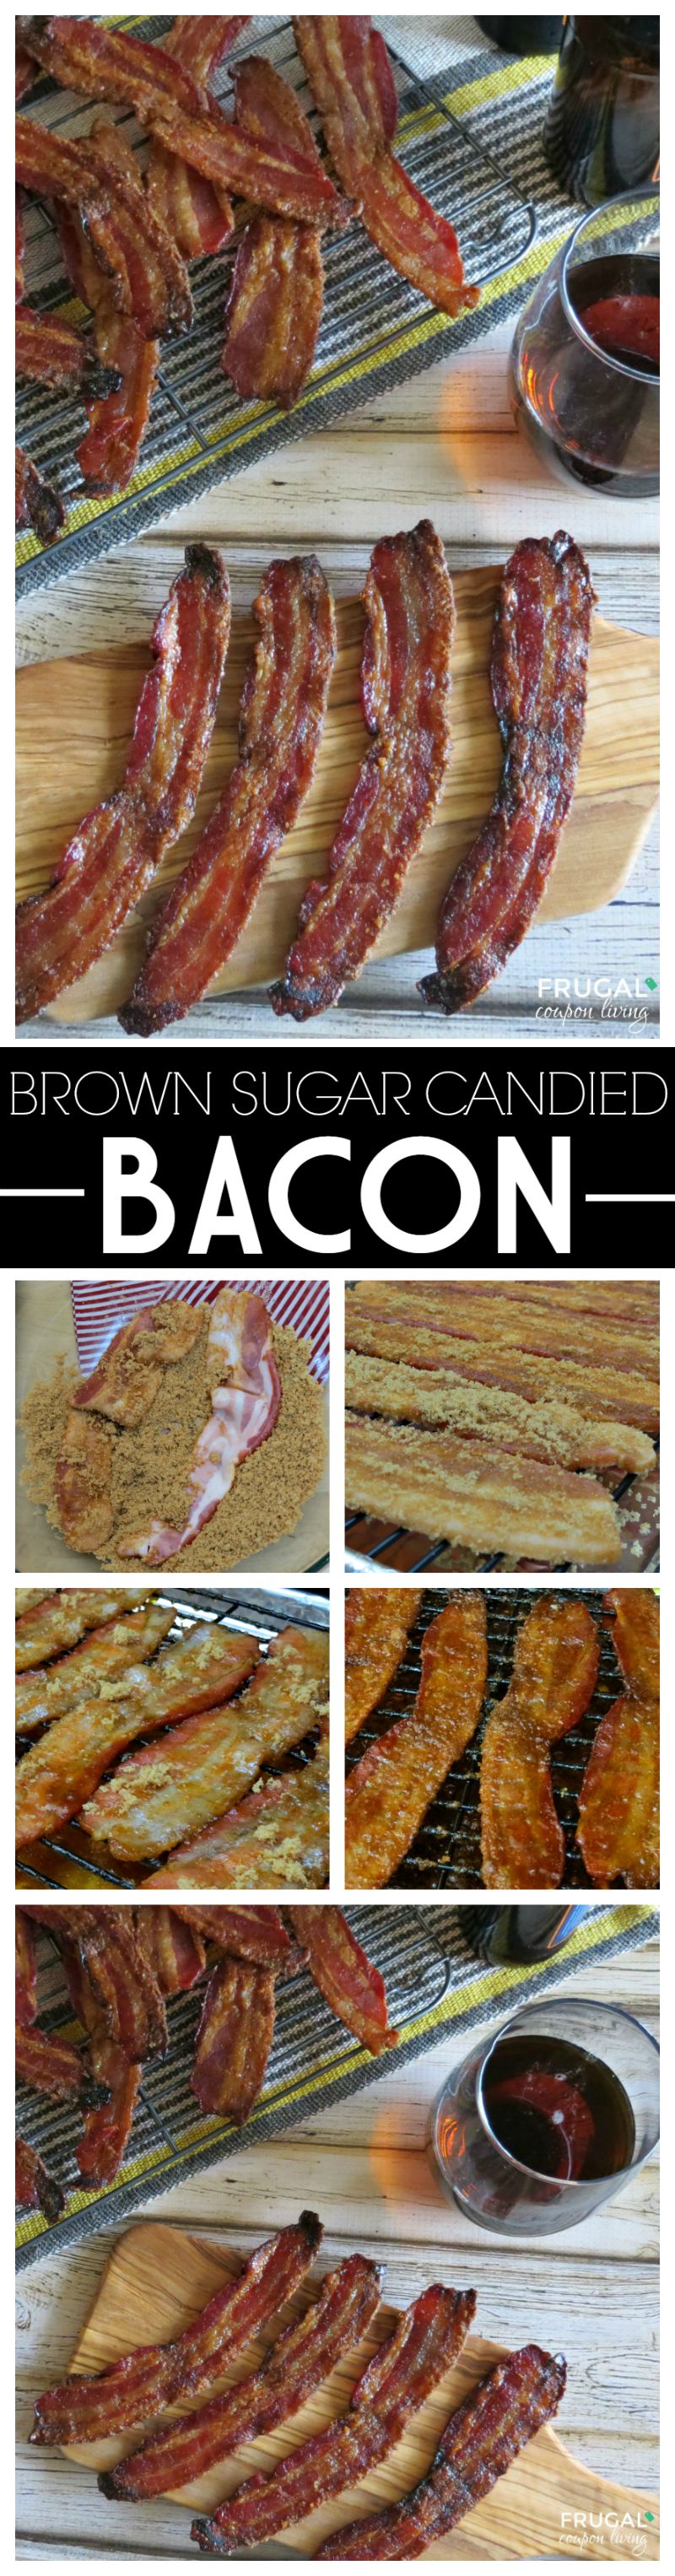 Brown-sugar-candied-bacon-frugal-coupon-living-collage